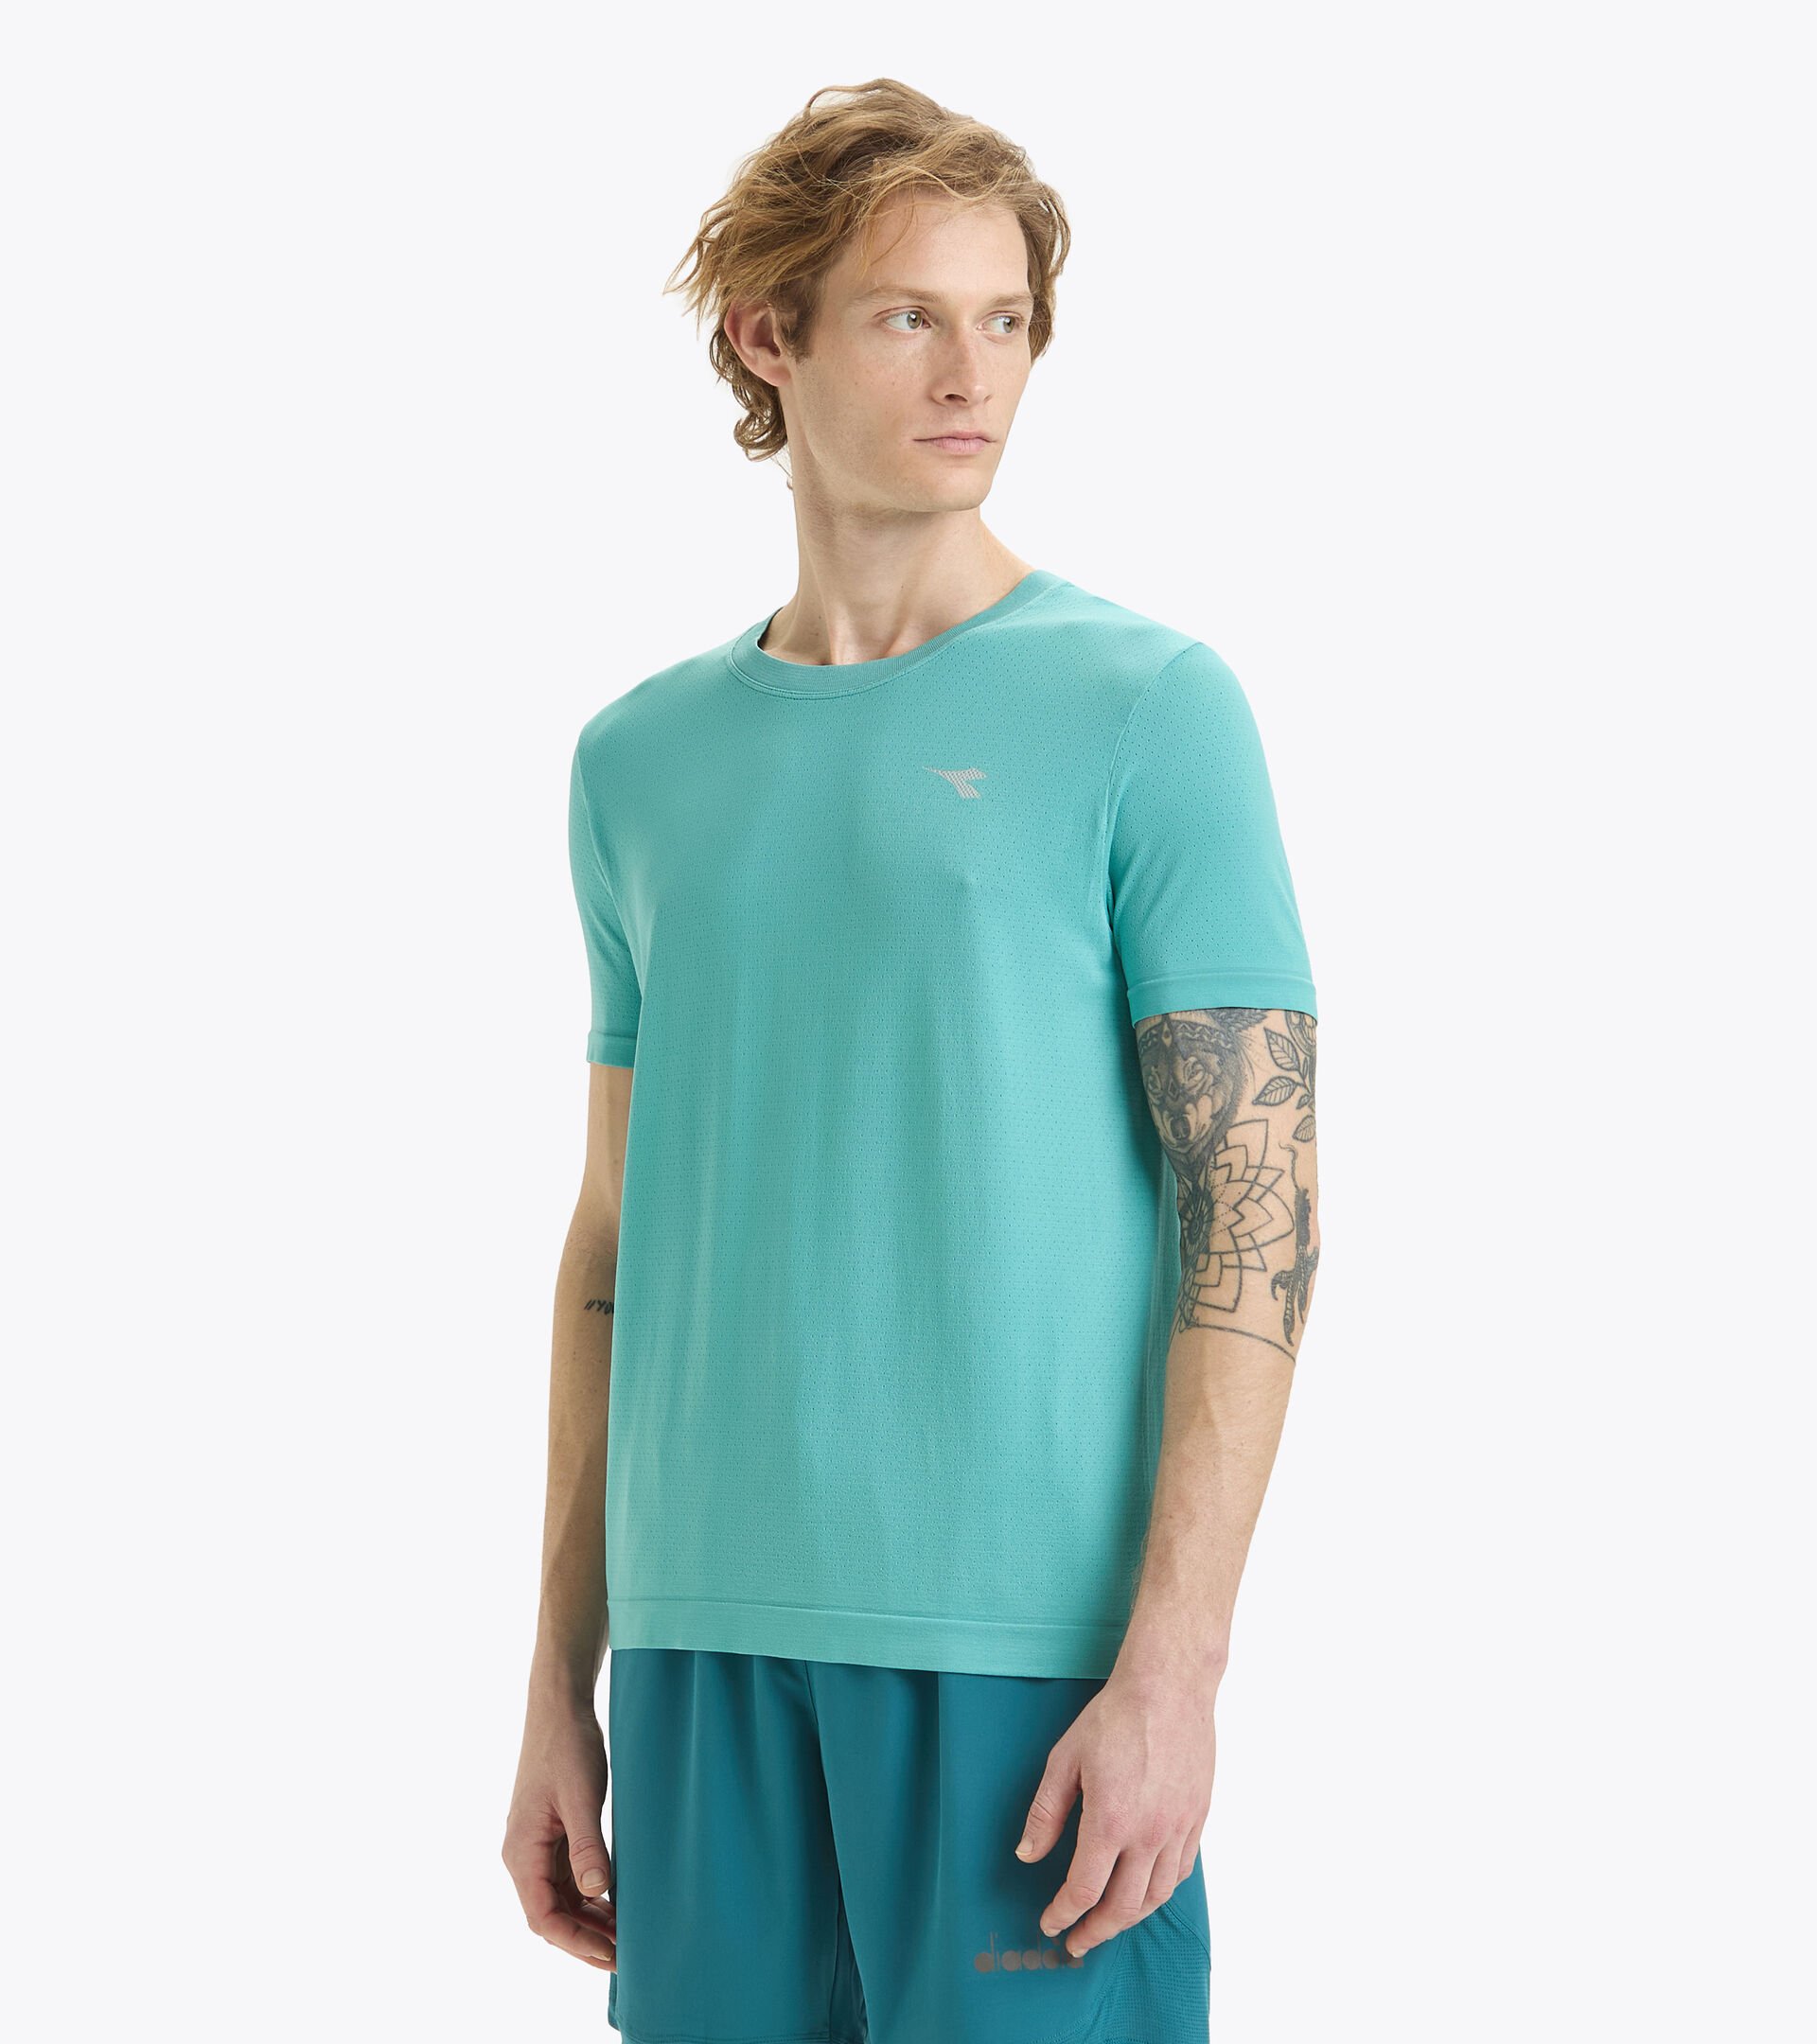 Seamless running t-shirt - Made in Italy - Men’s SS T-SHIRT SKIN FRIENDLY DUSTY TURQUOISE - Diadora